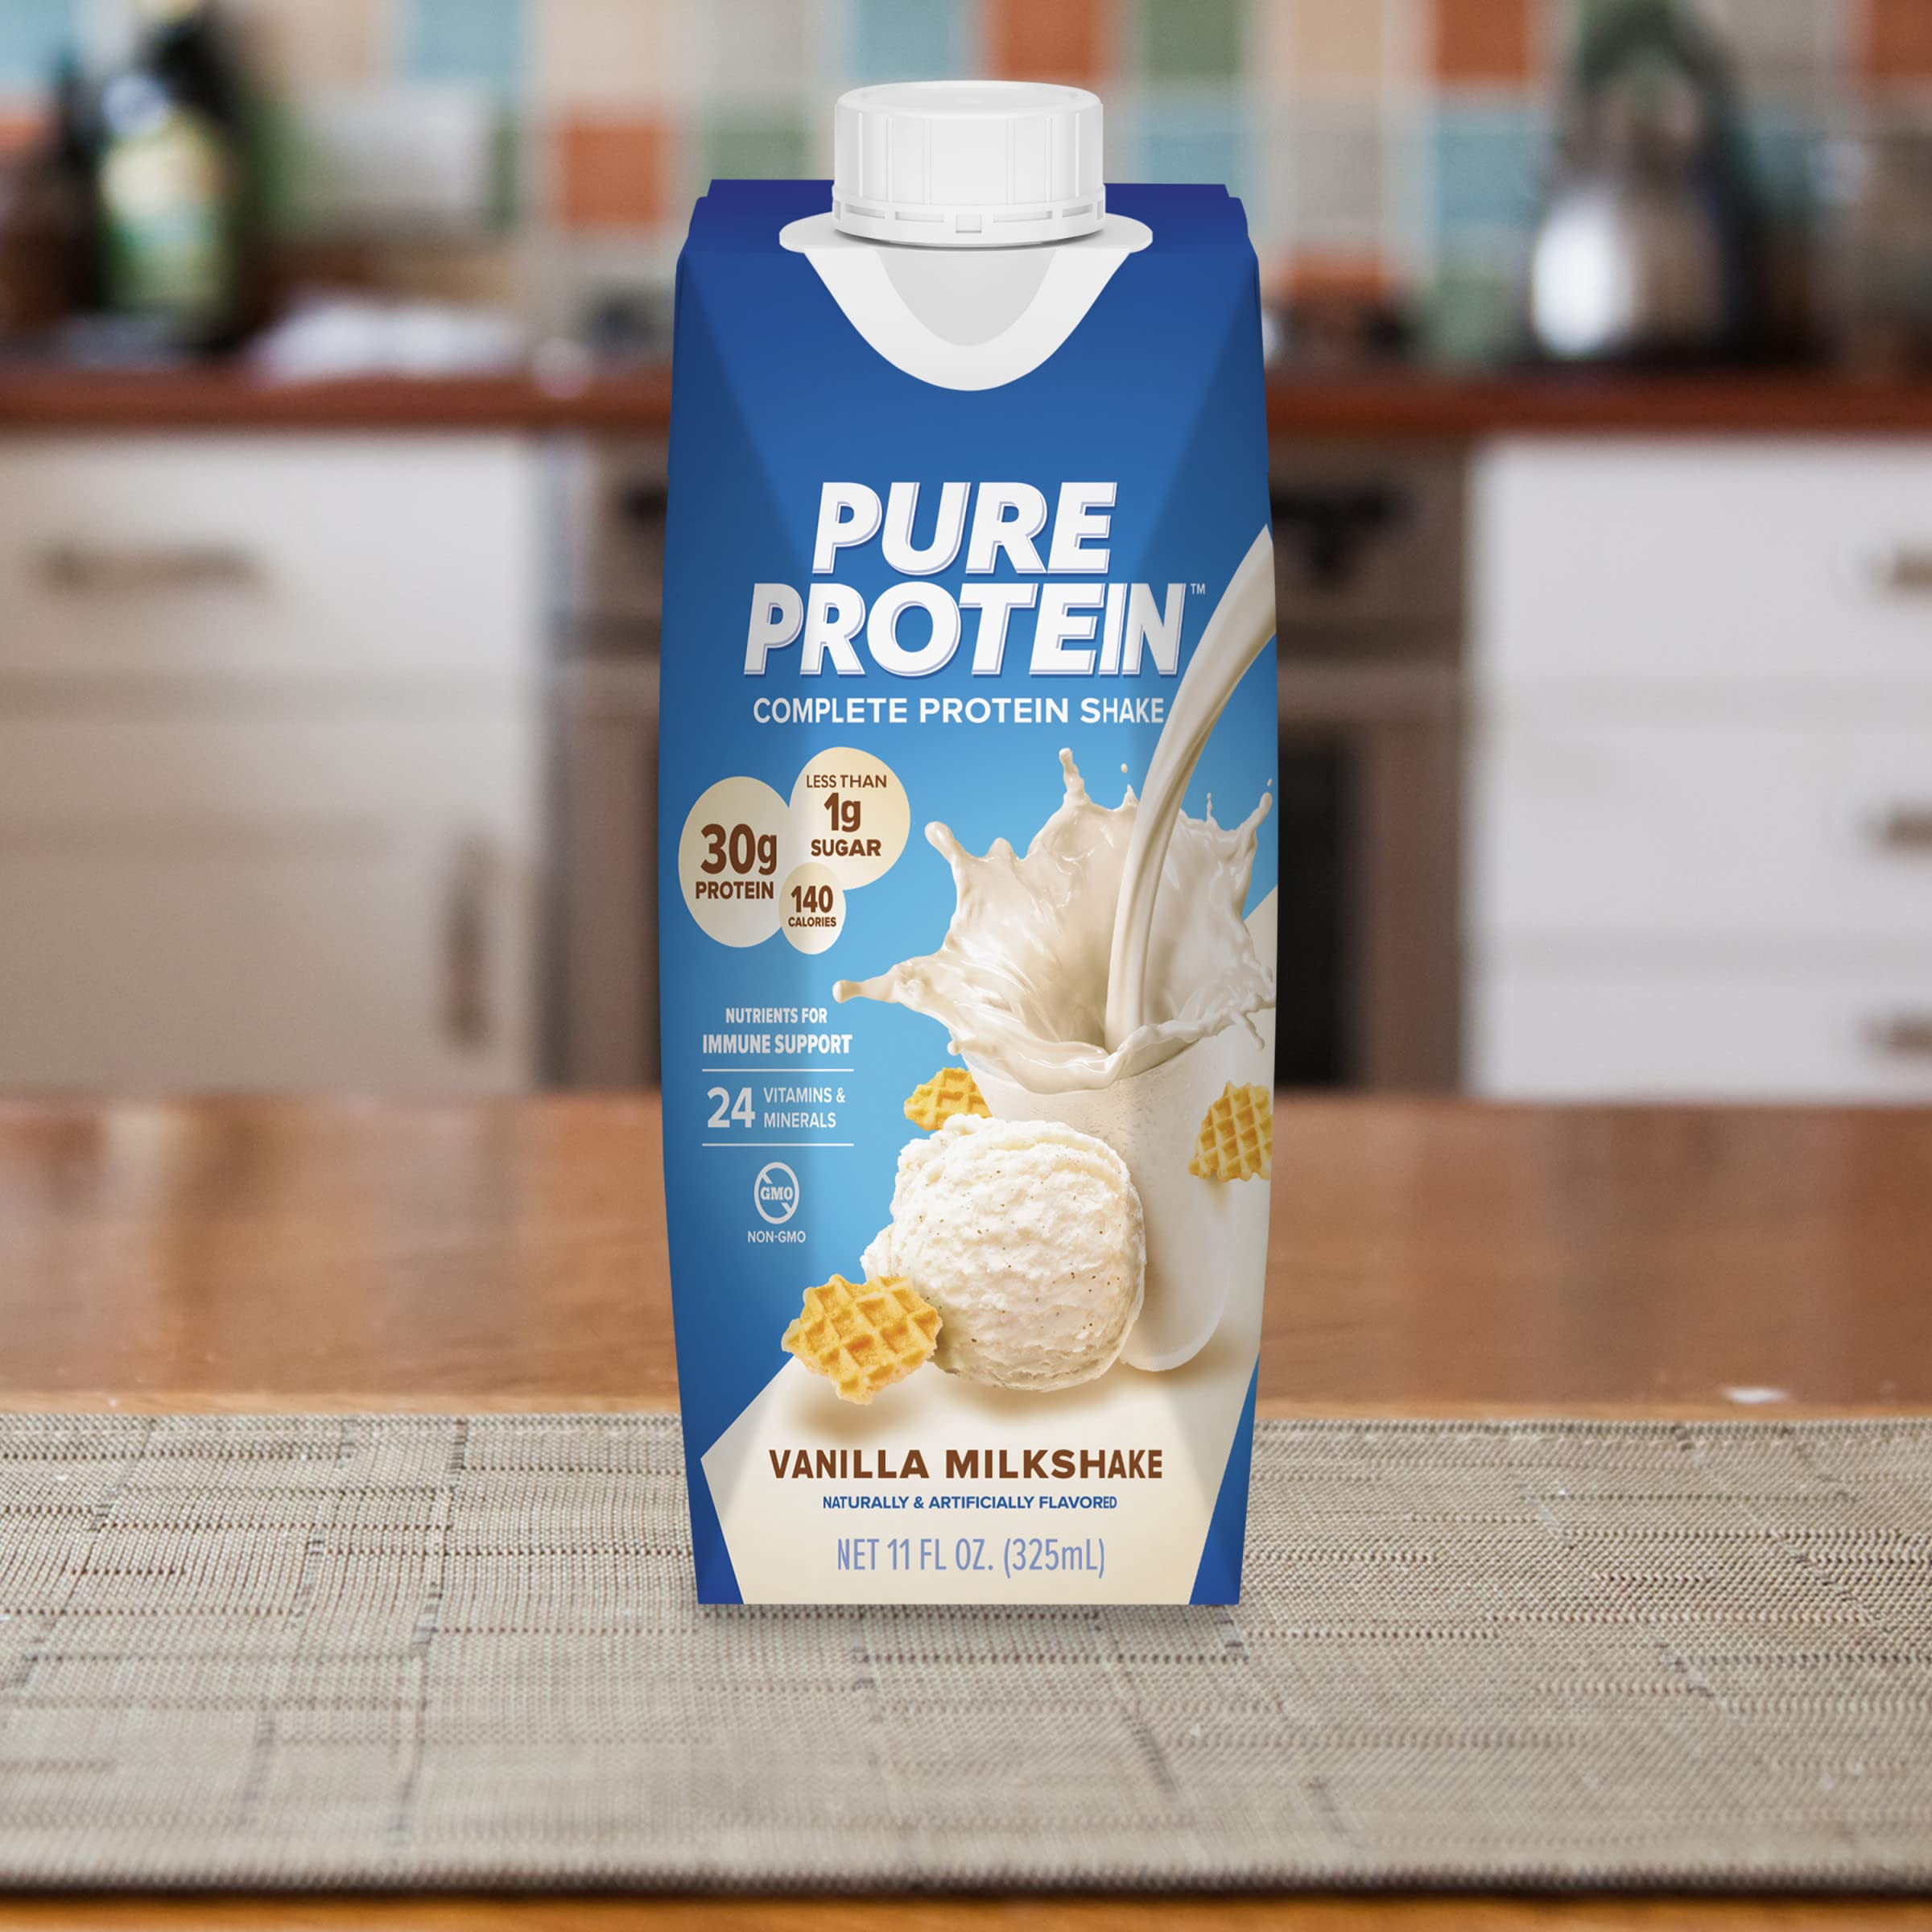 Pure Protein Vanilla Protein Shake, 30g Complete Protein, Vitamins A, C, D, and E plus Zinc to Support Immune Health, Ready to Drink and Keto-Friendly, 11oz Bottles, 12 Pack